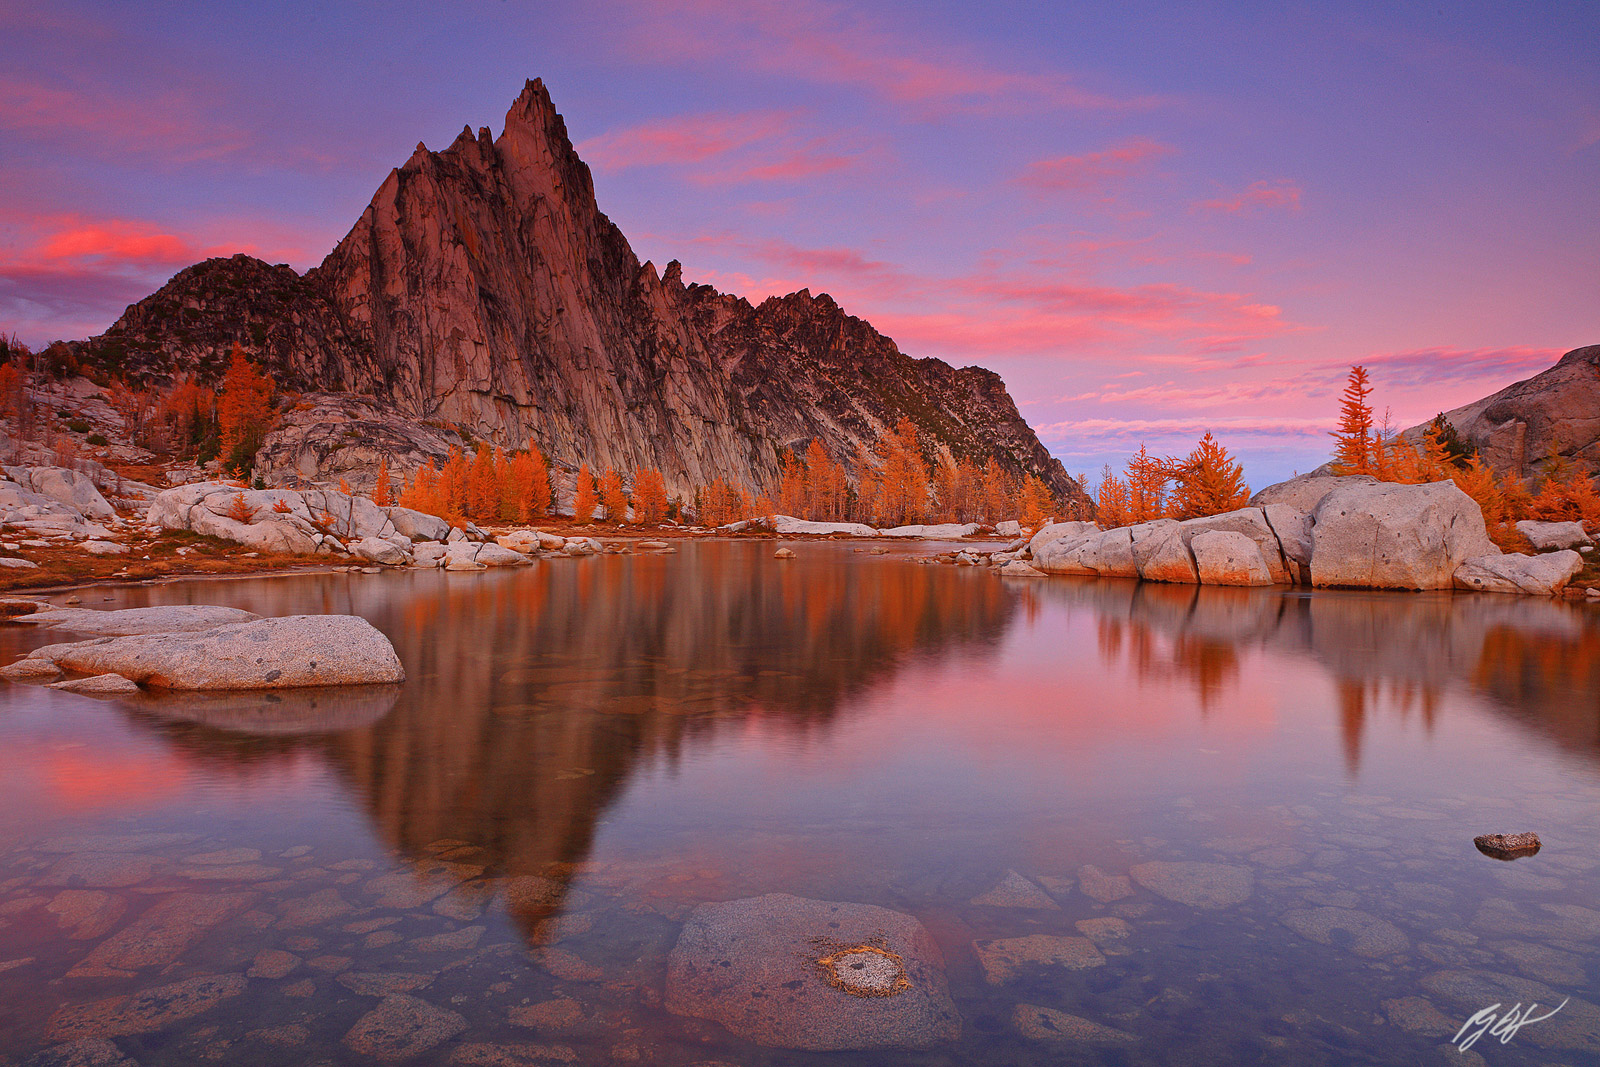 Sunset alpenglow Reflected in Gnome Tarn in the Enchantments, Alpine Lakes Wilderness in Washington